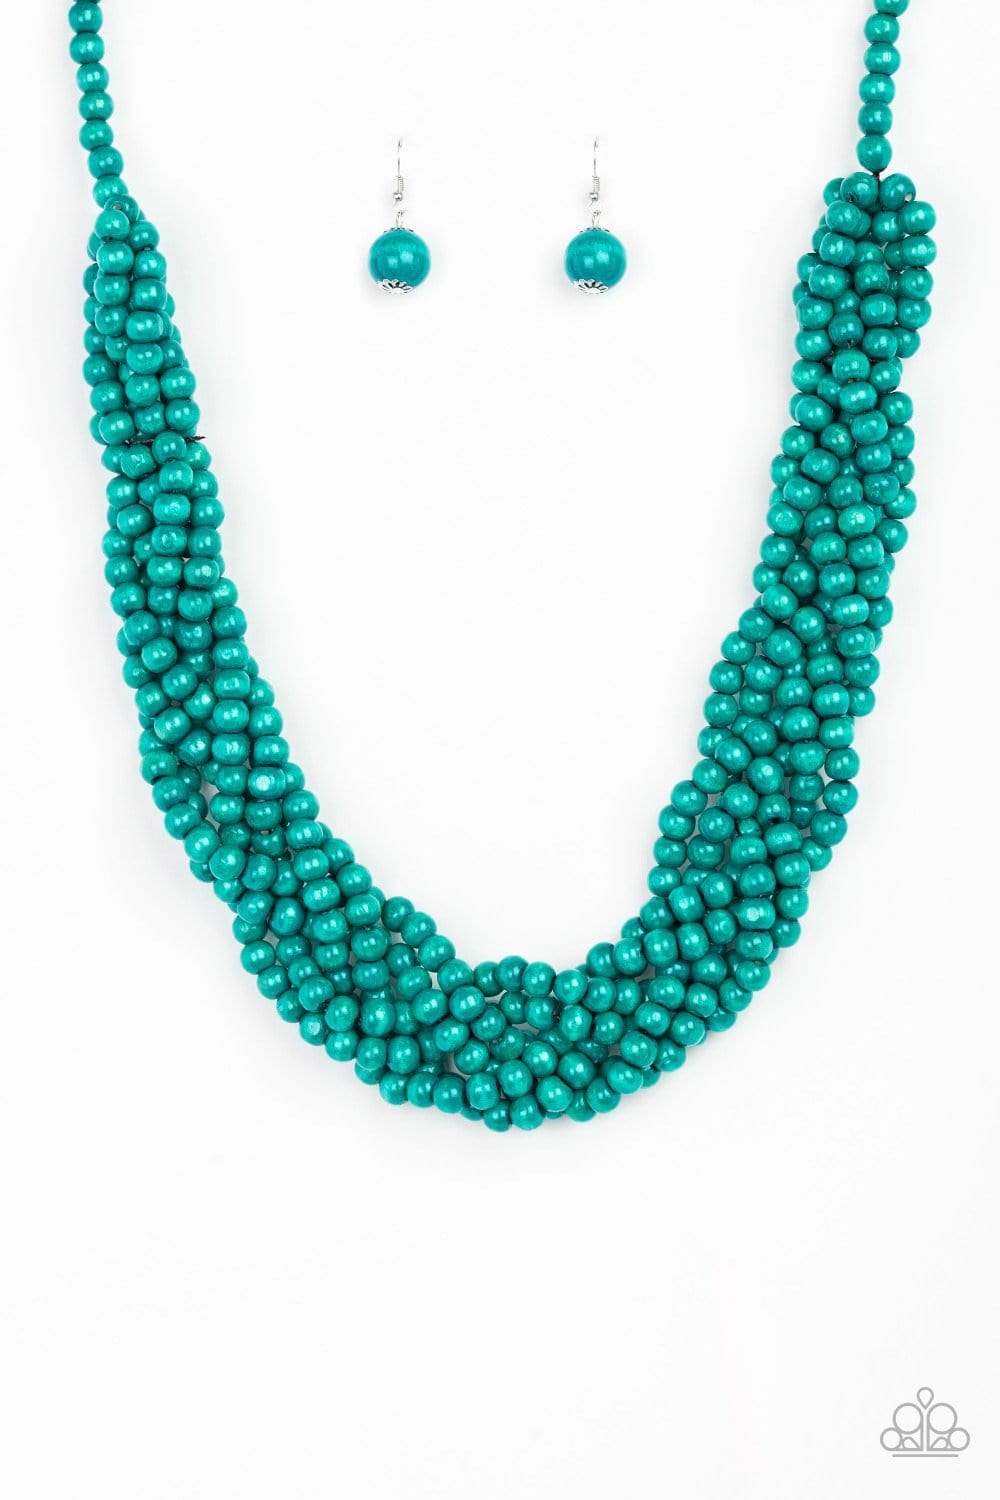 Tahiti Tropic - Blue/Turquoise: Paparazzi Accessories - Jewels N’ Thingz Boutique